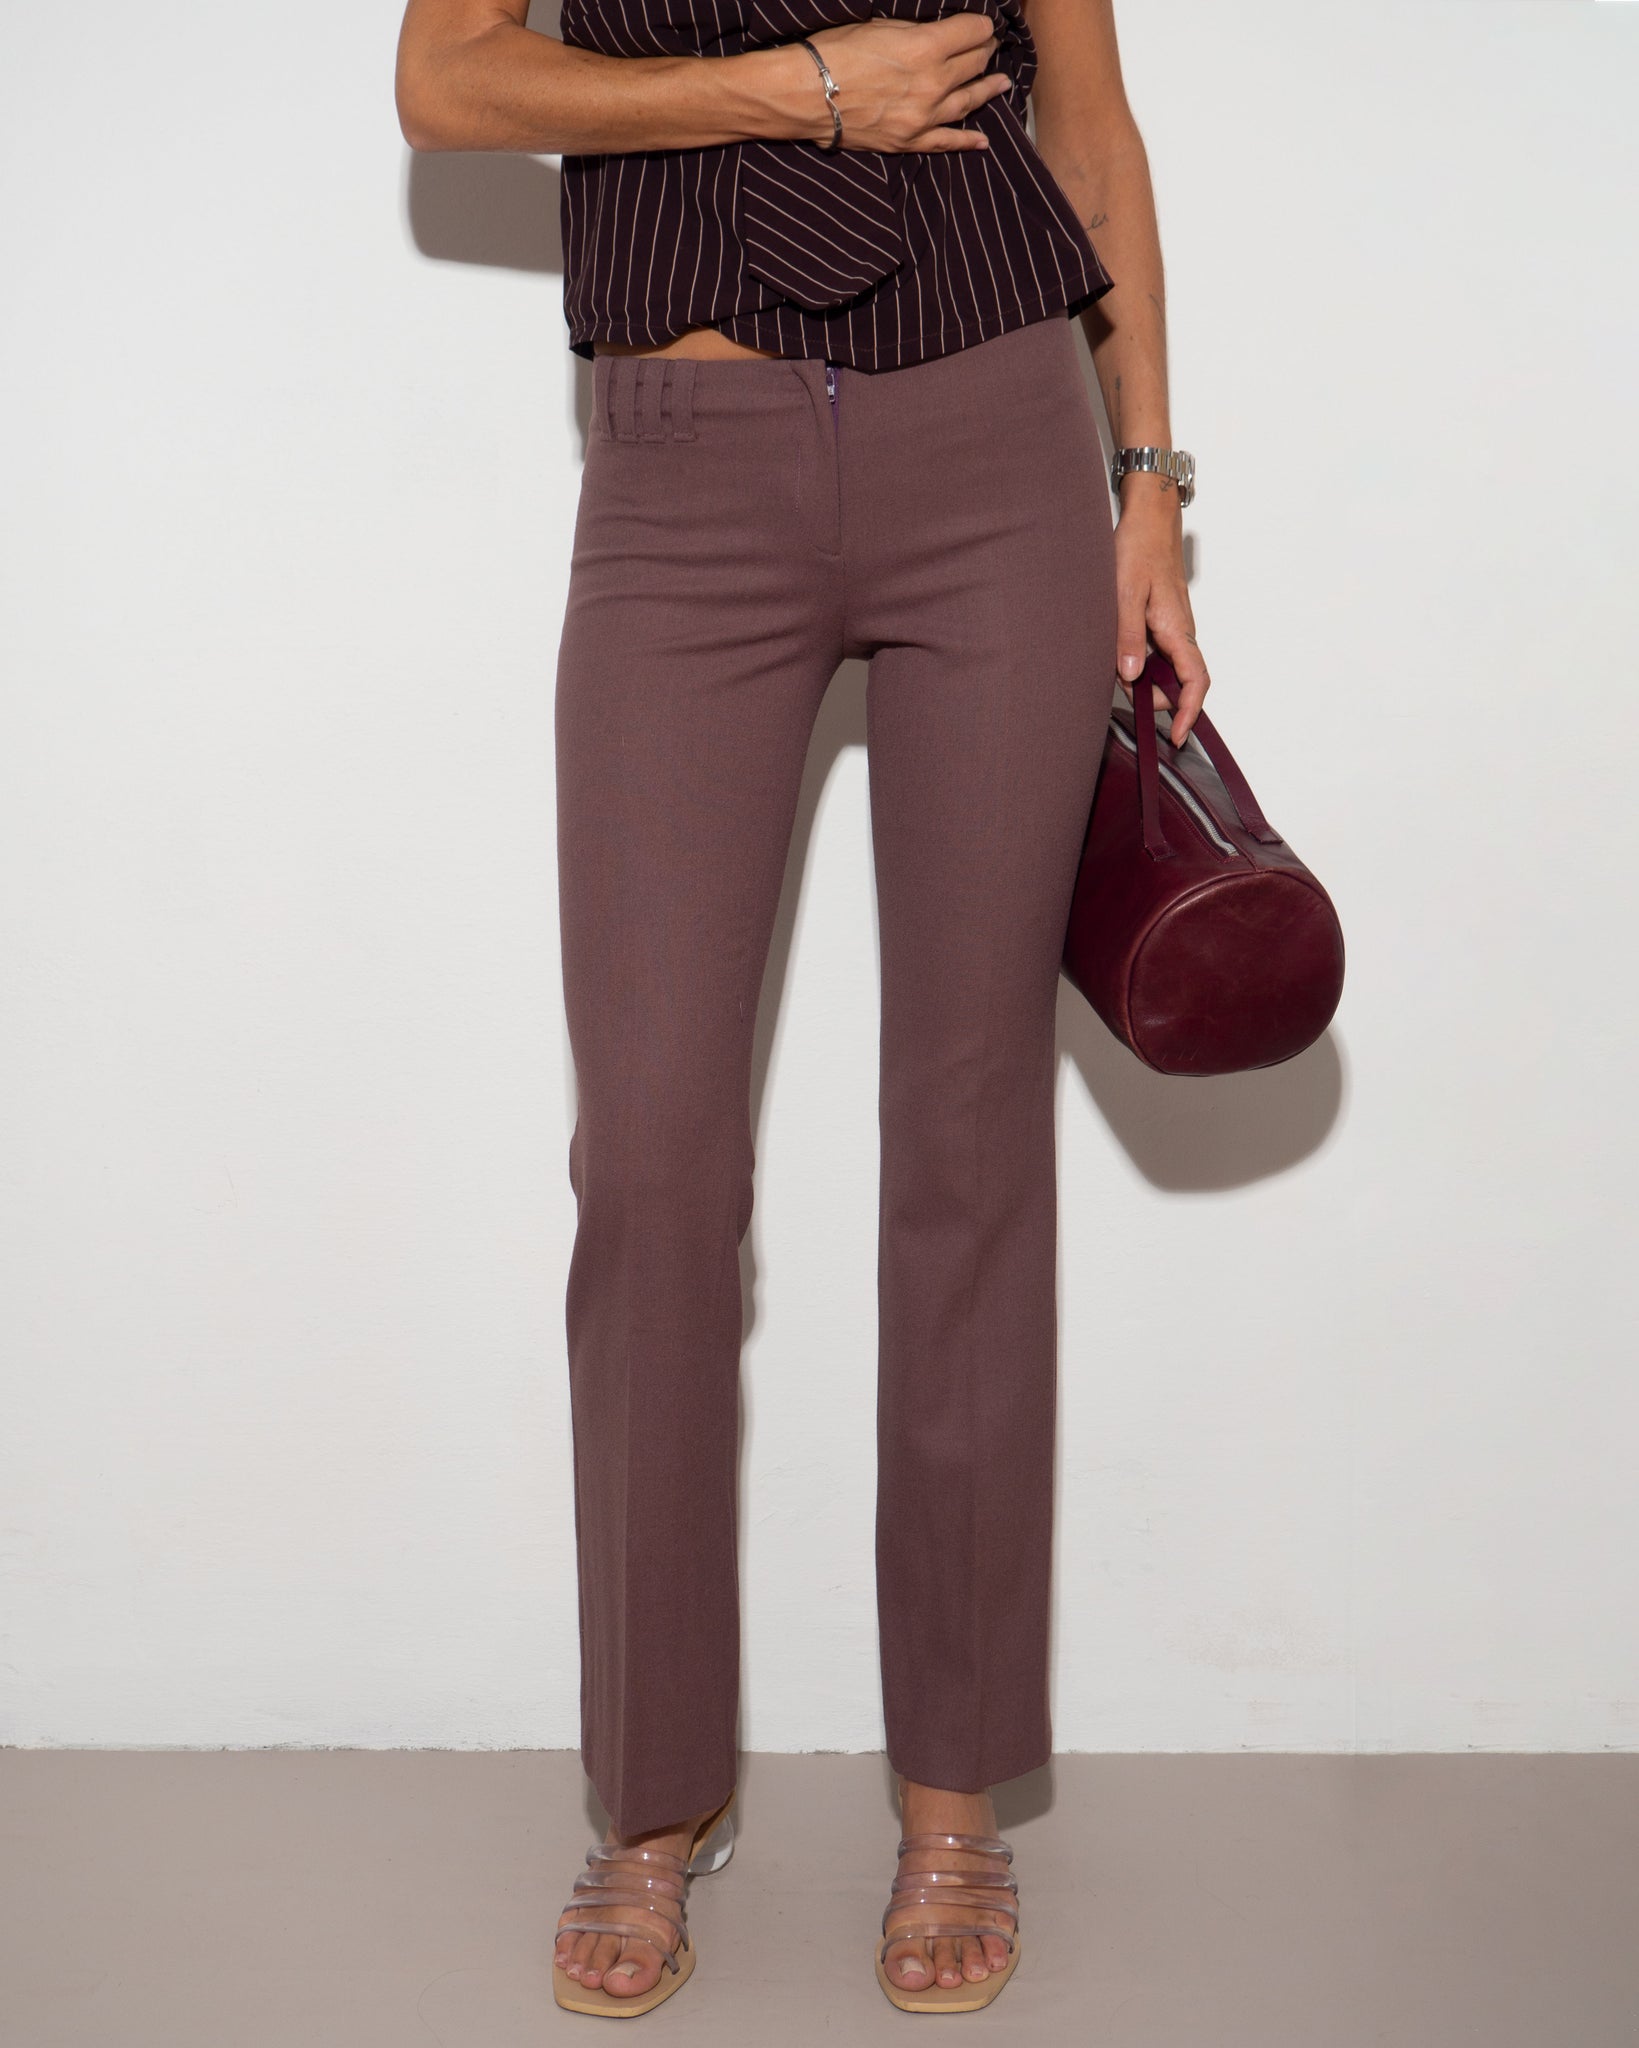 Rose Taupe Pants